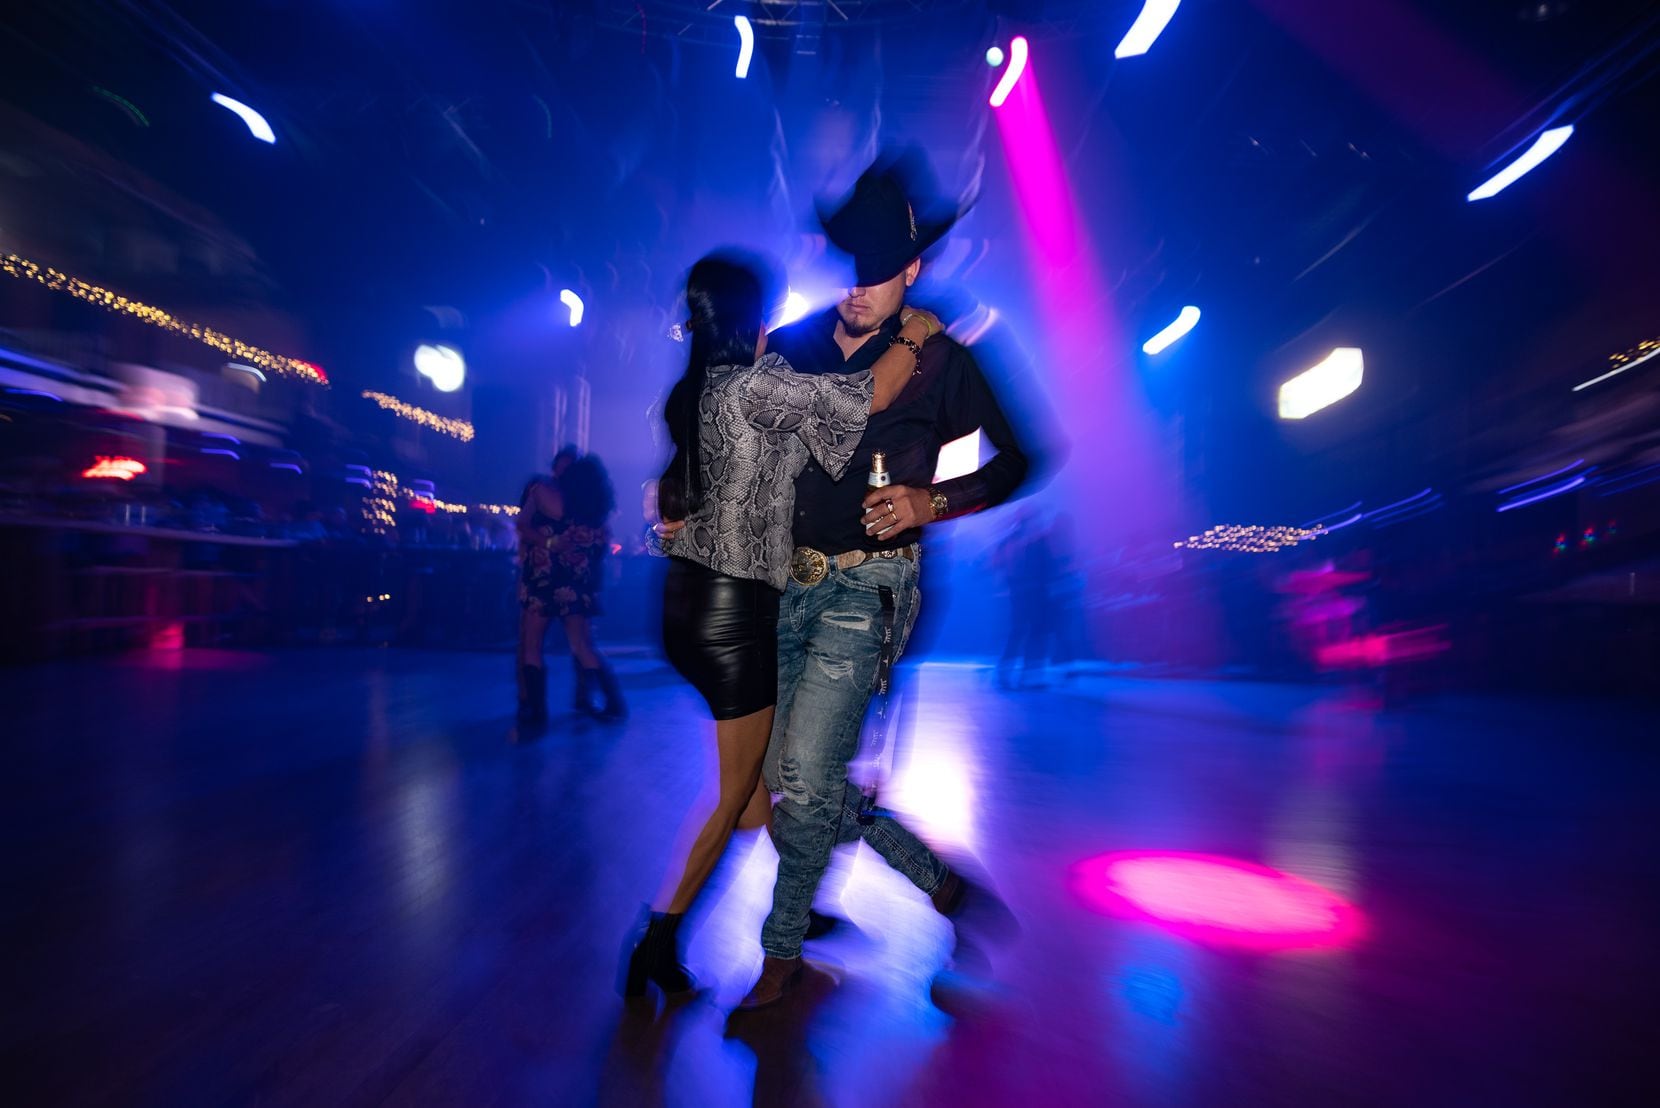 The couple dances on the dance floor at Rodeo West Dallas on Saturday night, January 7, 2023.